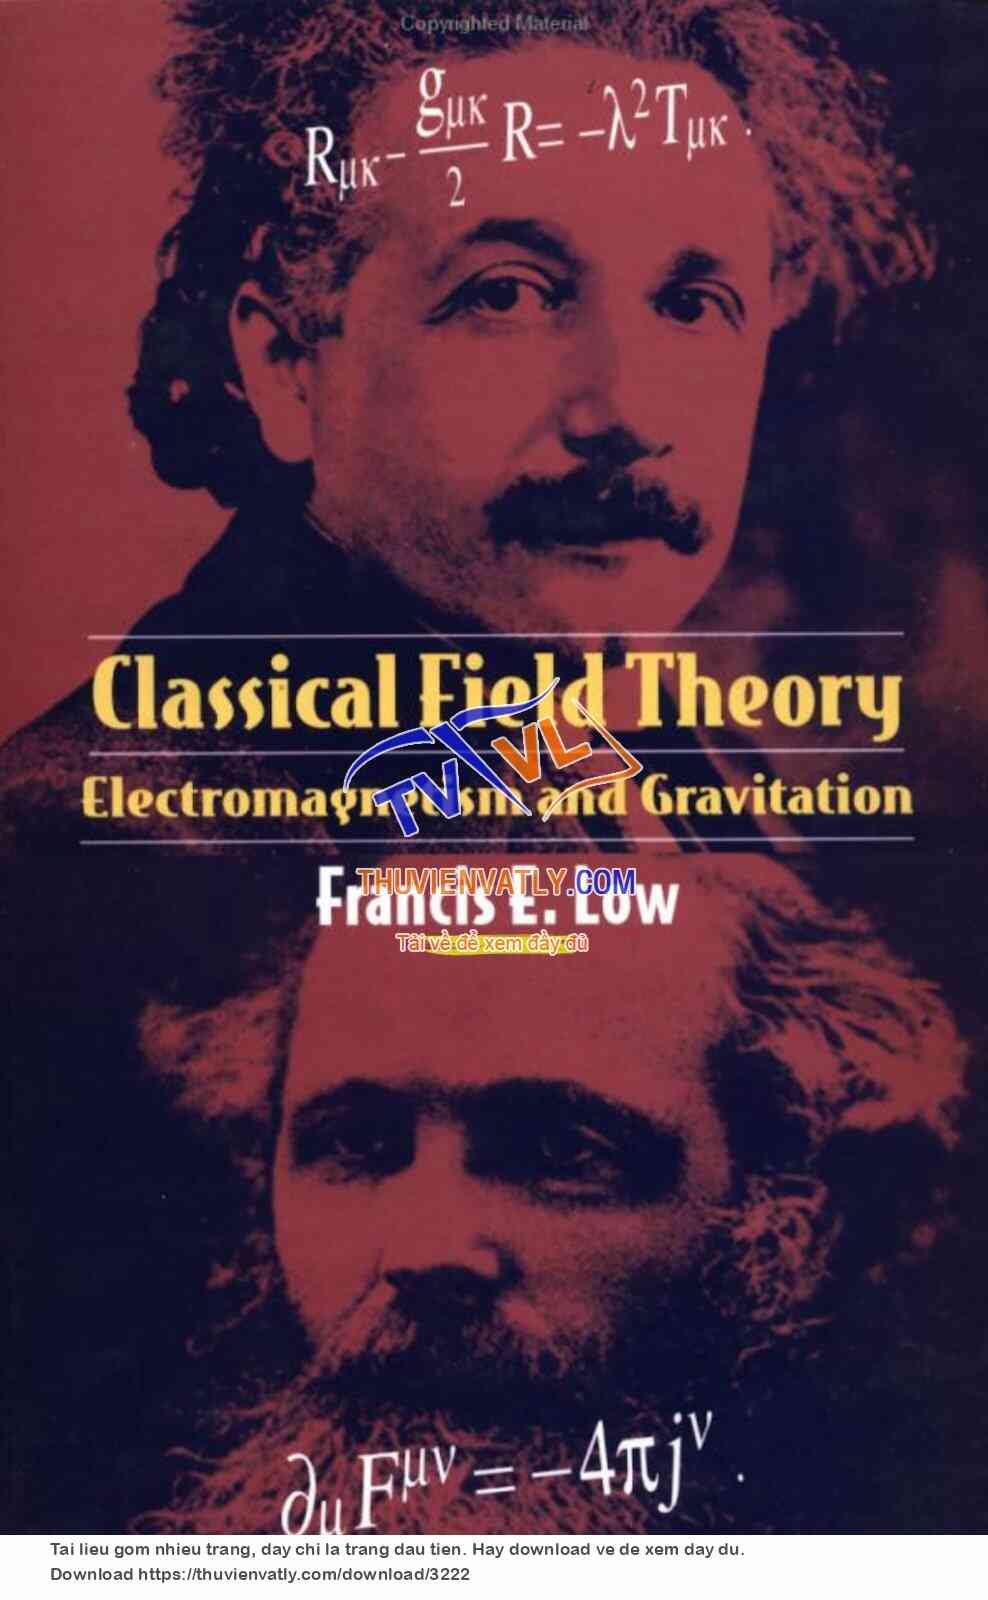 CLASSICAL FIELD THEORY - ELECTROMAGNETISM AND GRAVITATION